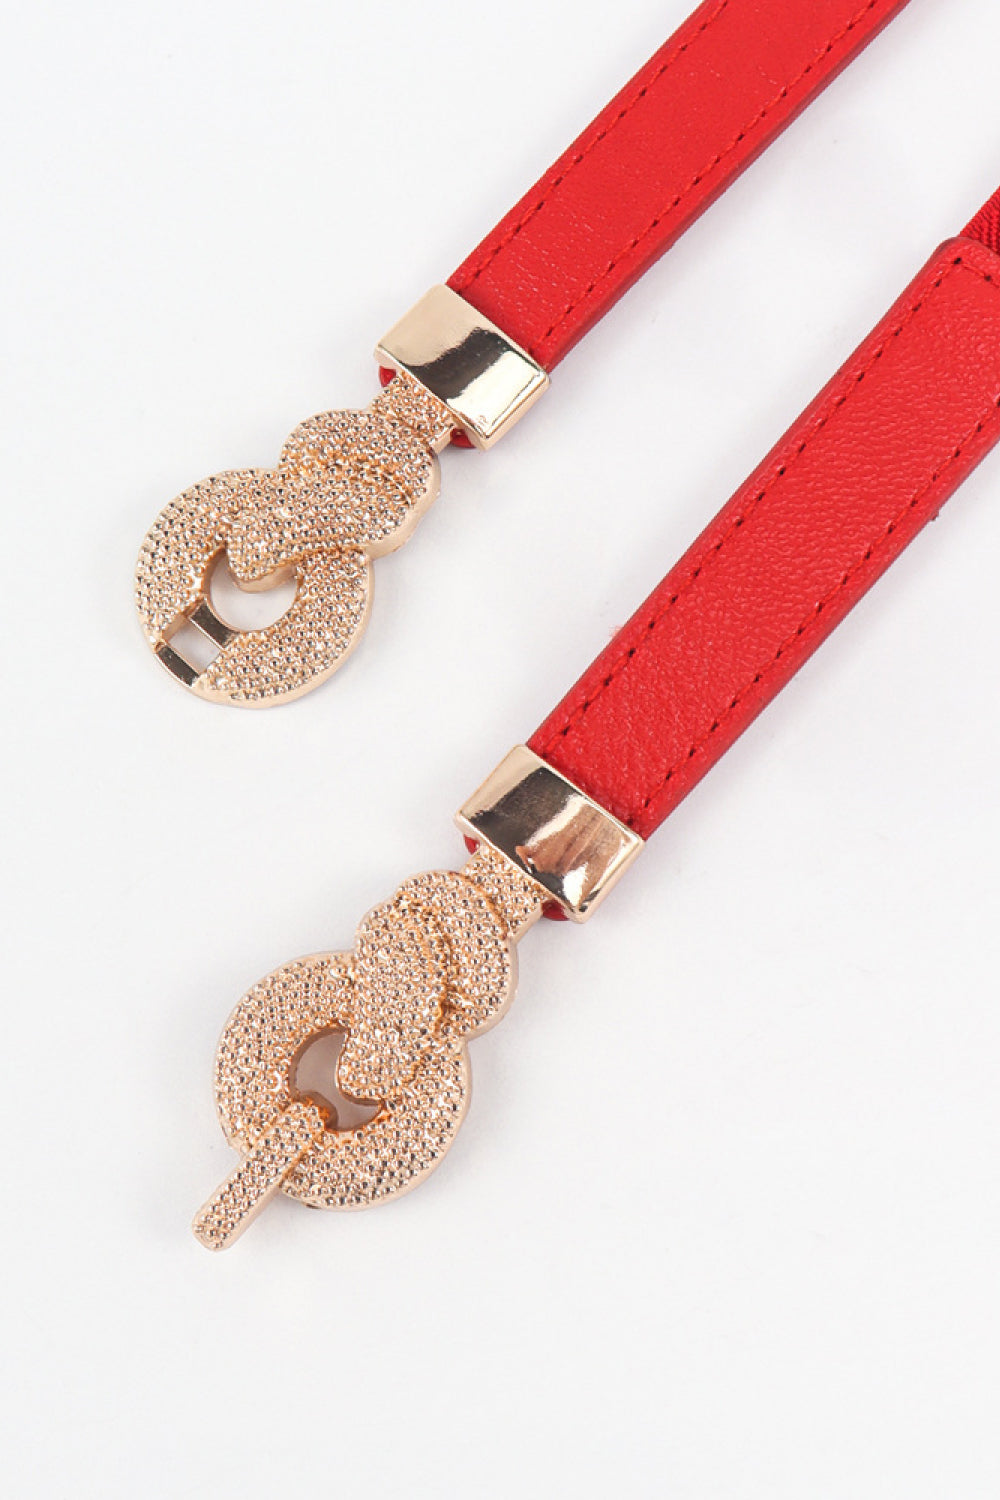 Zinc Alloy Buckle PU Leather Belt Red / One Size